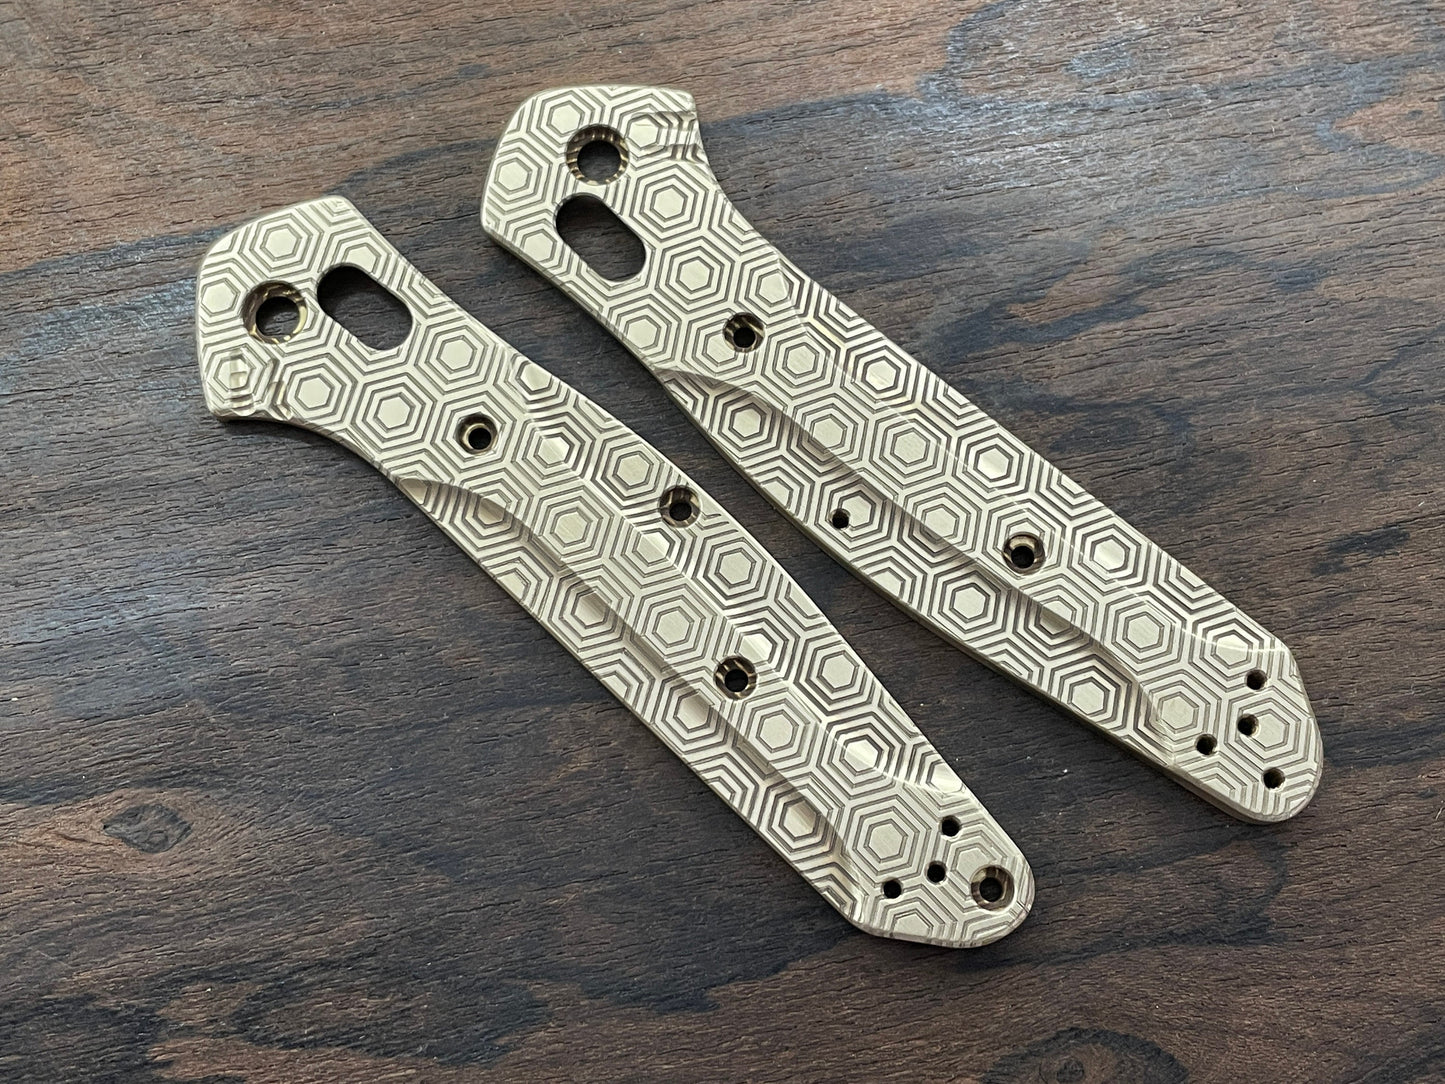 HONEYCOMB engraved Brass Scales for Benchmade 940 Osborne